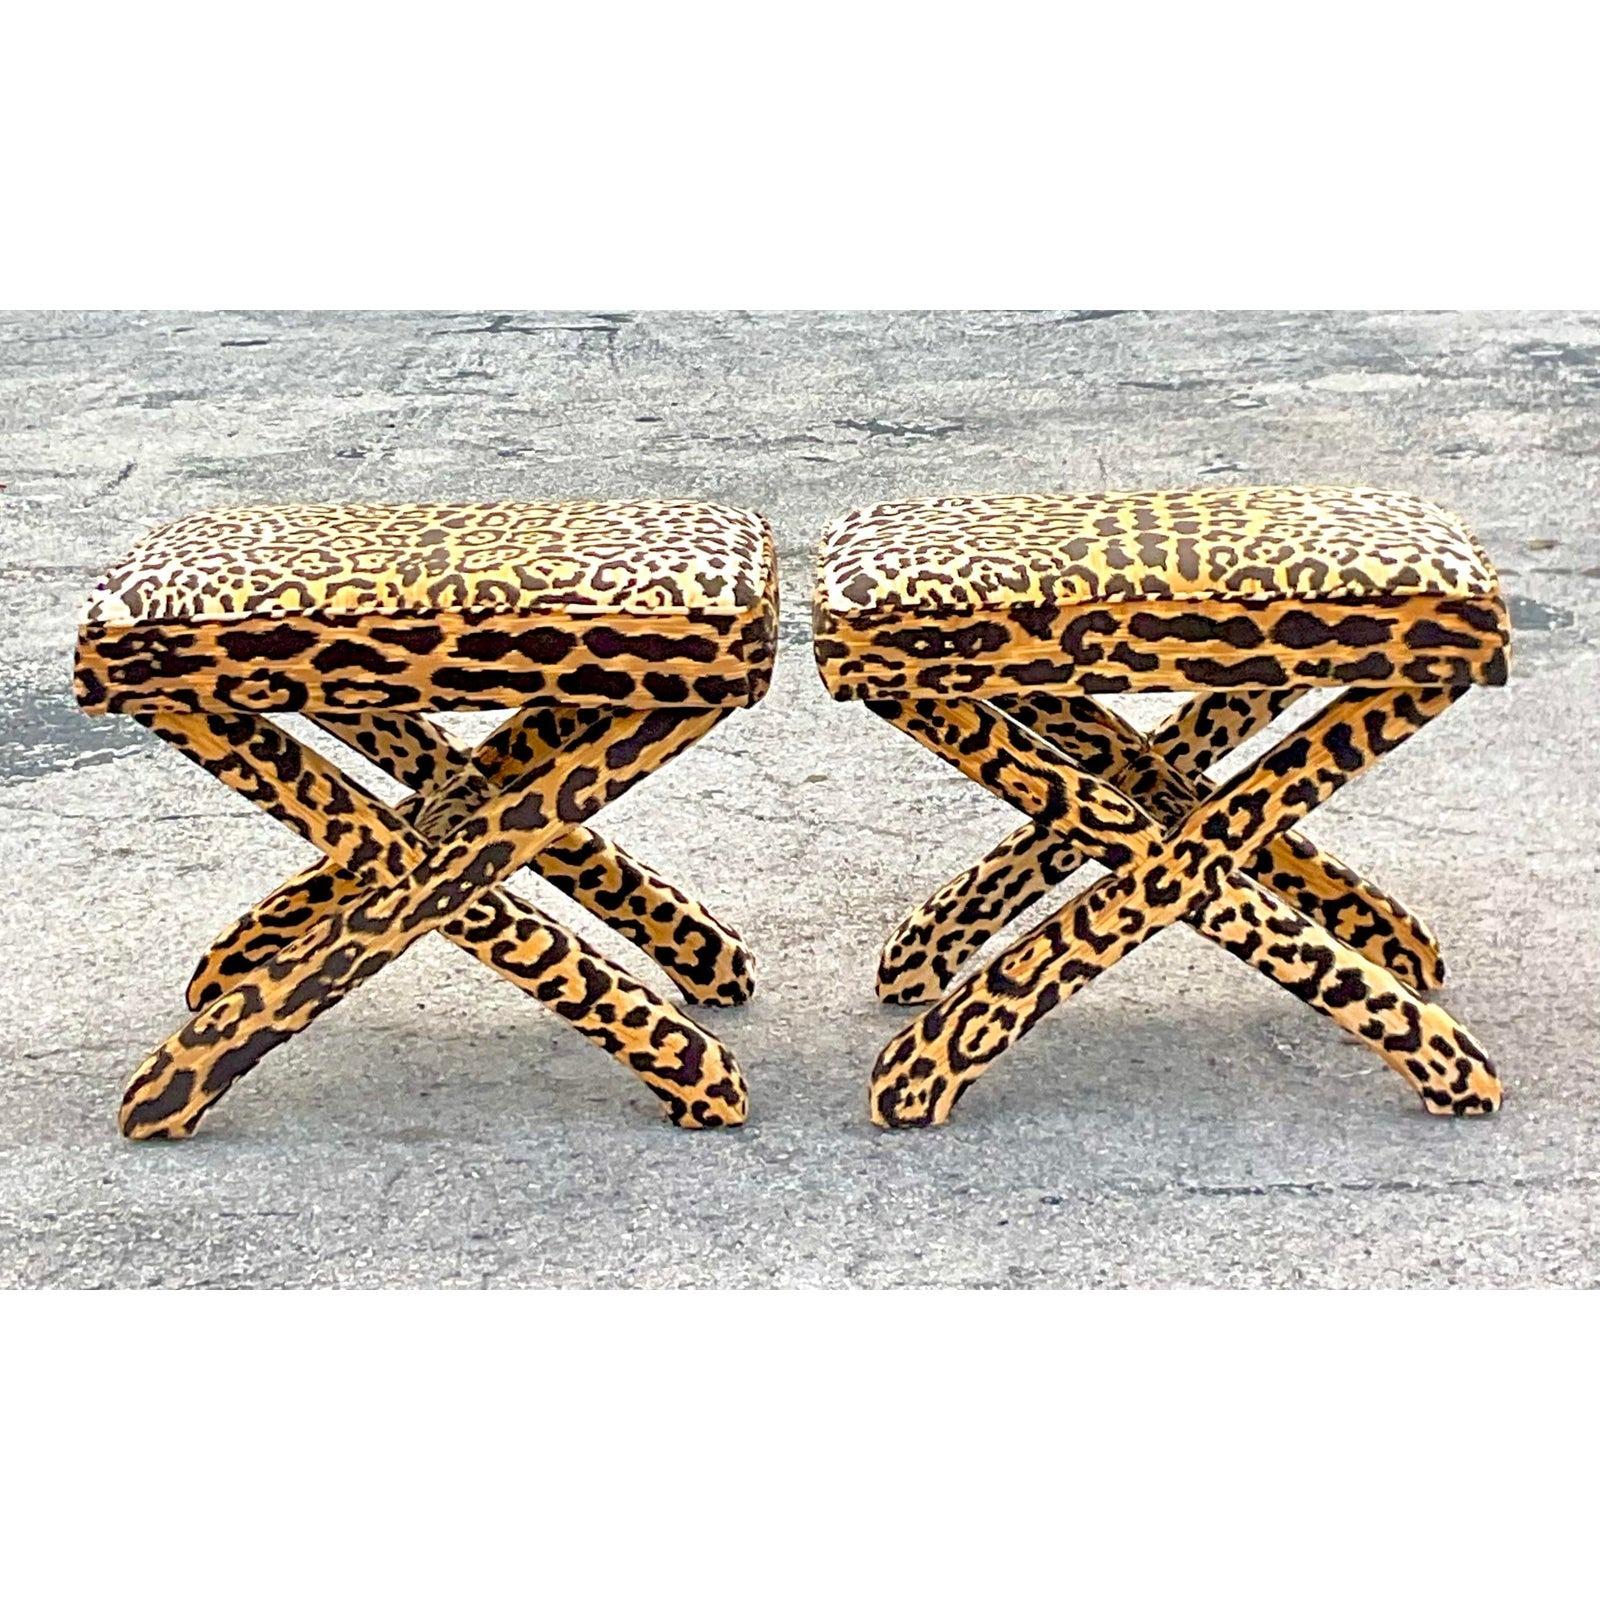 Introduce bold elegance to your space with this pair of Vintage Regency Leopard X Benches. These striking pieces combine American style with Regency flair, featuring plush leopard print upholstery and classic X-frame design. Perfect for adding a